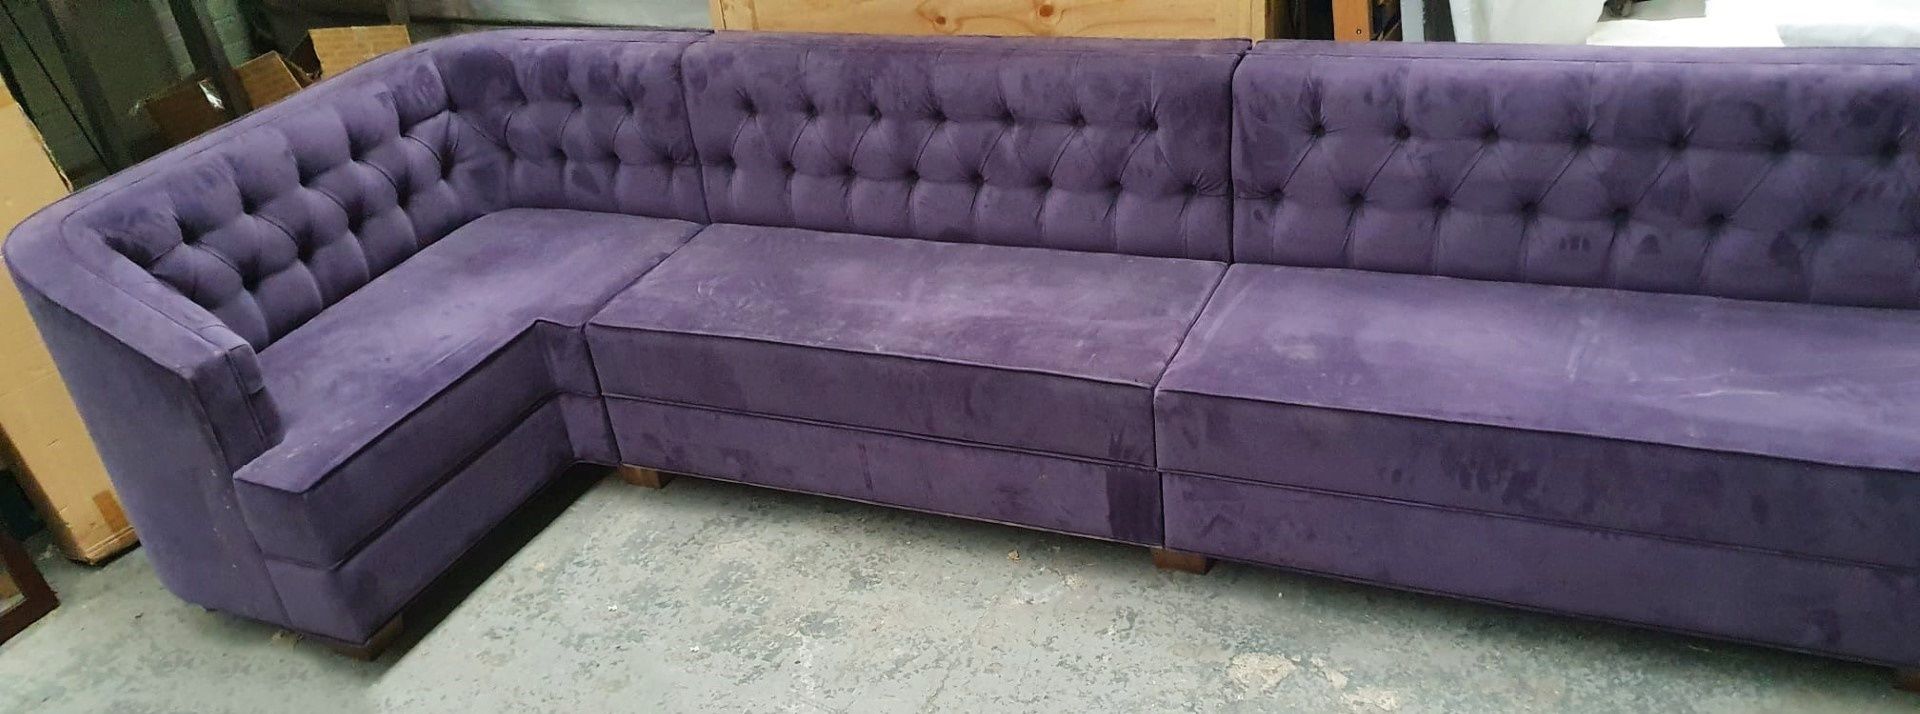 5.2-Metres Of Commercial Sofa Seating, Upholstered In A Premium Purple Fabric - Ref: G/IT - CL815 - Image 3 of 6